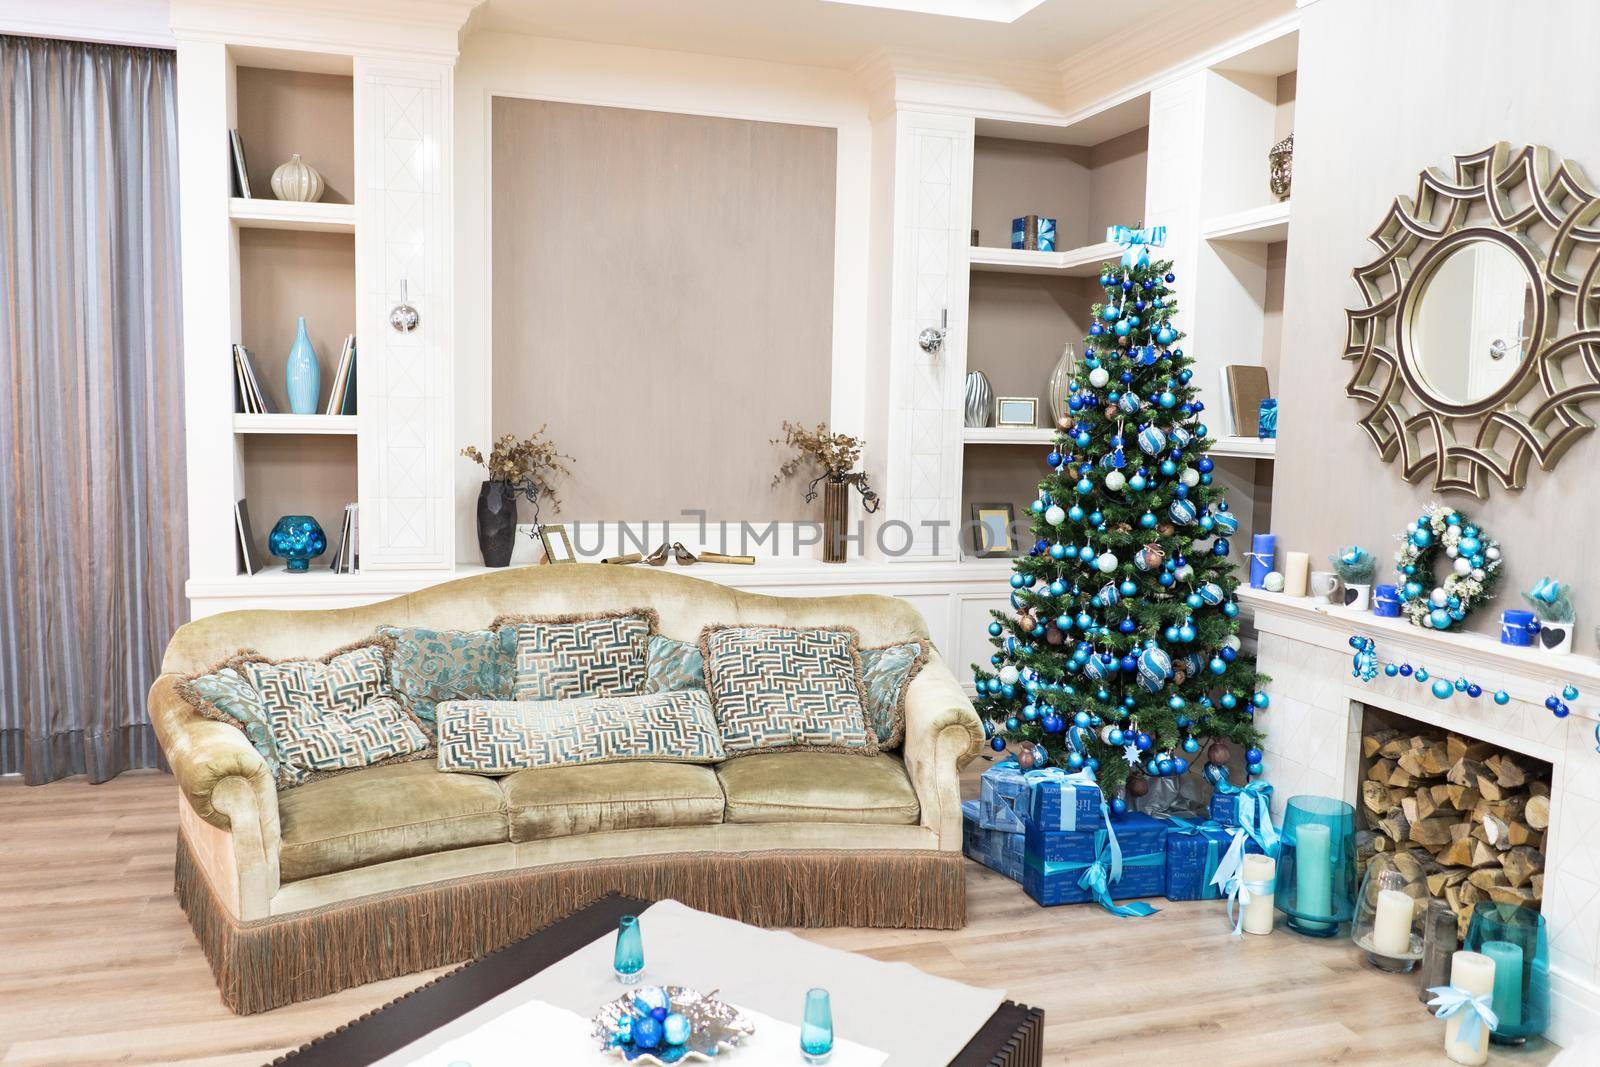 Beautiful New Year Interior with Christmas Tree in Corner. Couch with Pillows and Green Christmas Tree with Beautiful Presents. Sweet Home Comfort by LipikStockMedia